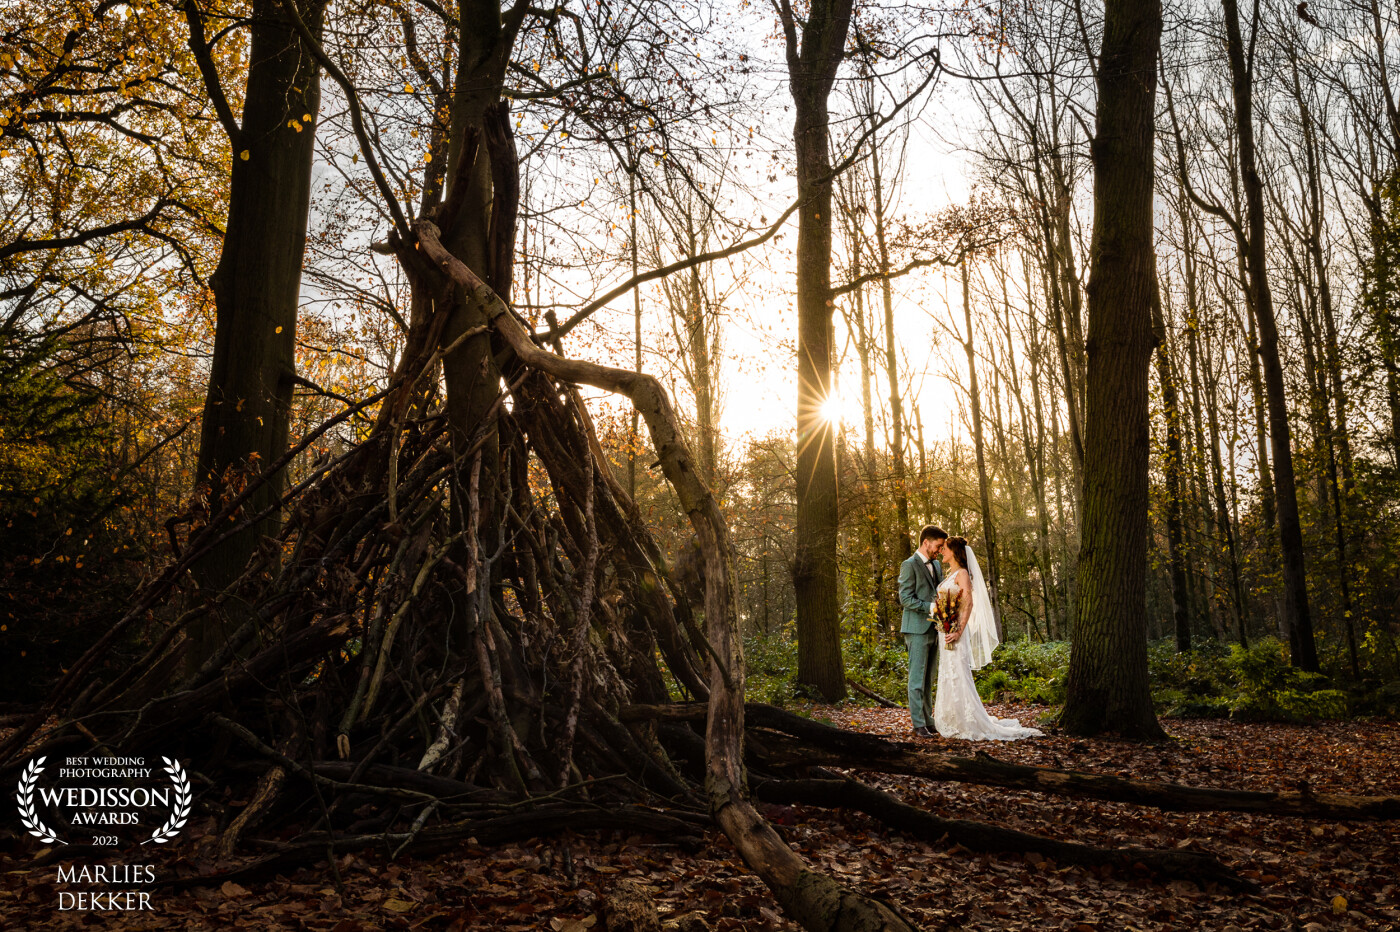 The forest, the light, it all came together on this autumn wedding with this lovely couple :)